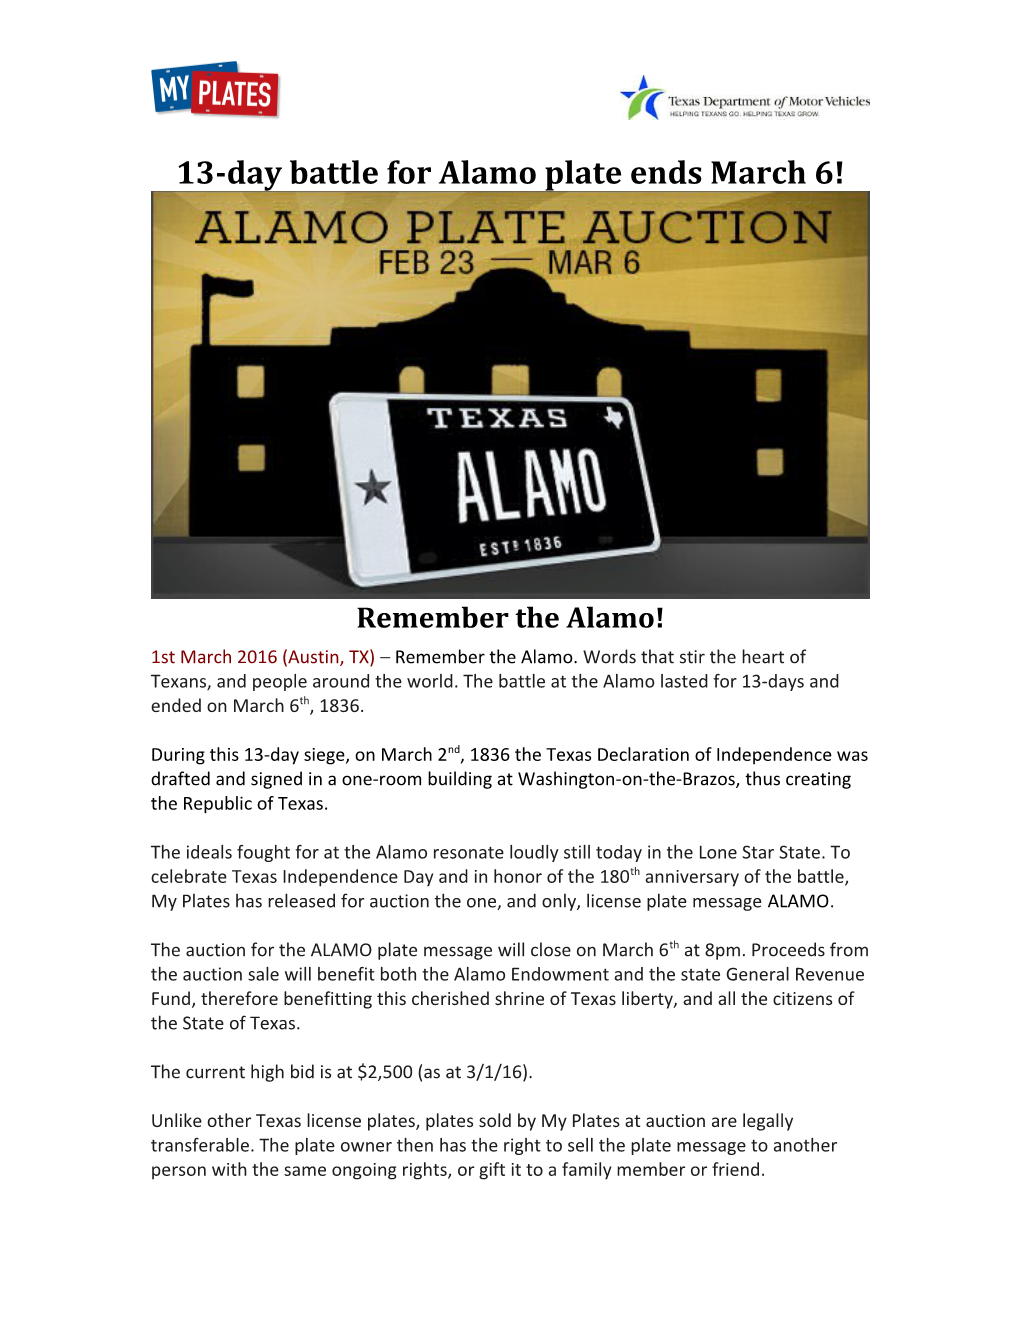 13-Day Battle for Alamo Plate Ends March 6!